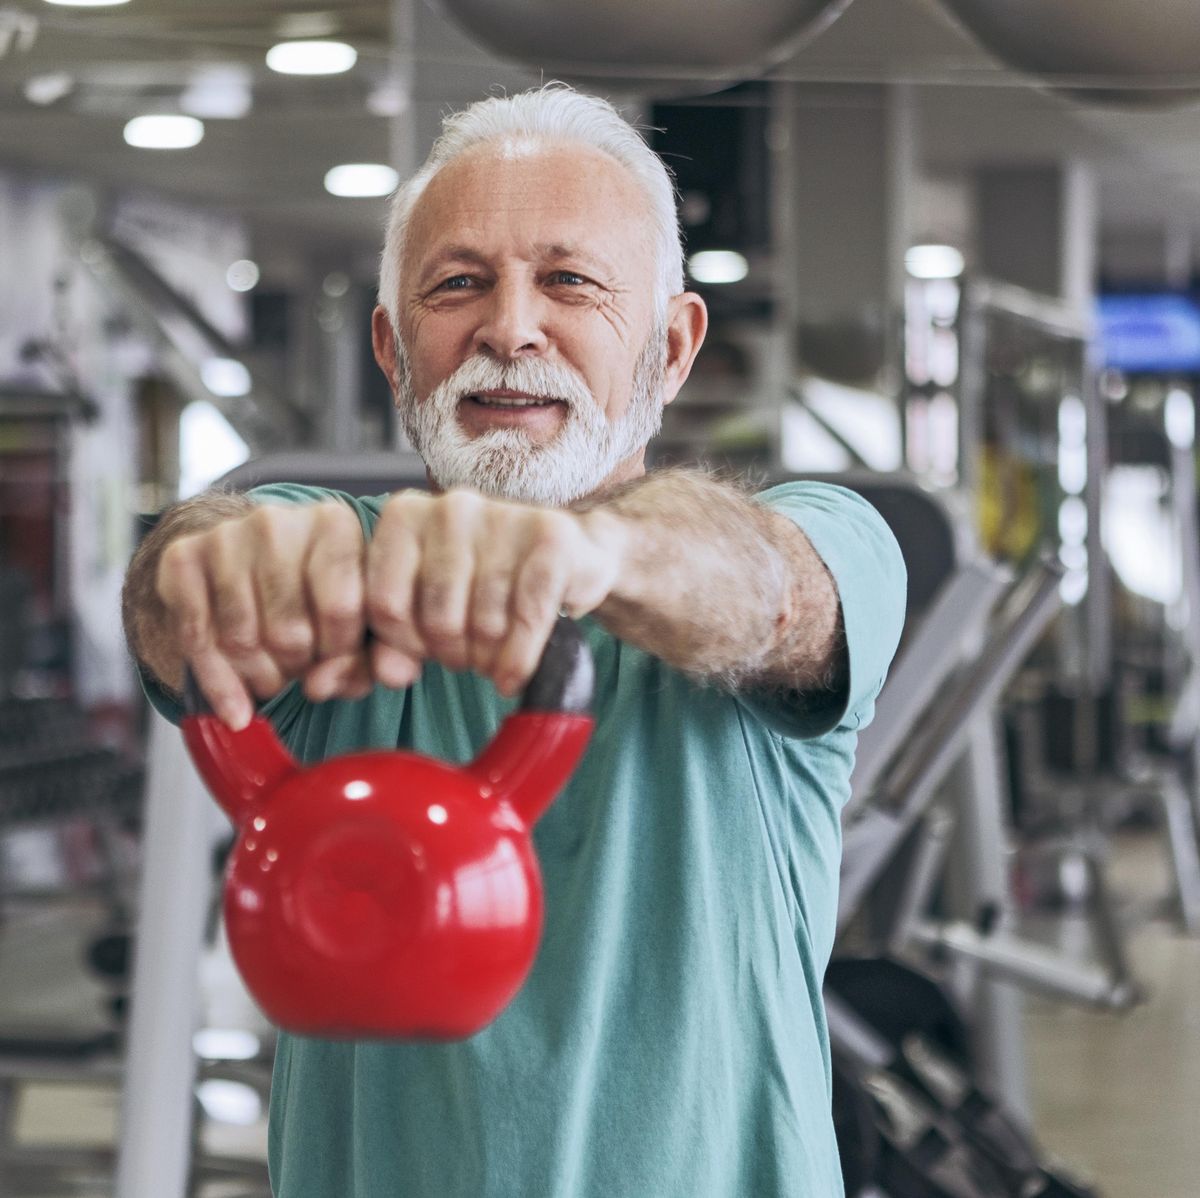 The Over 50 Training Plan: Best Exercises For Over 50s